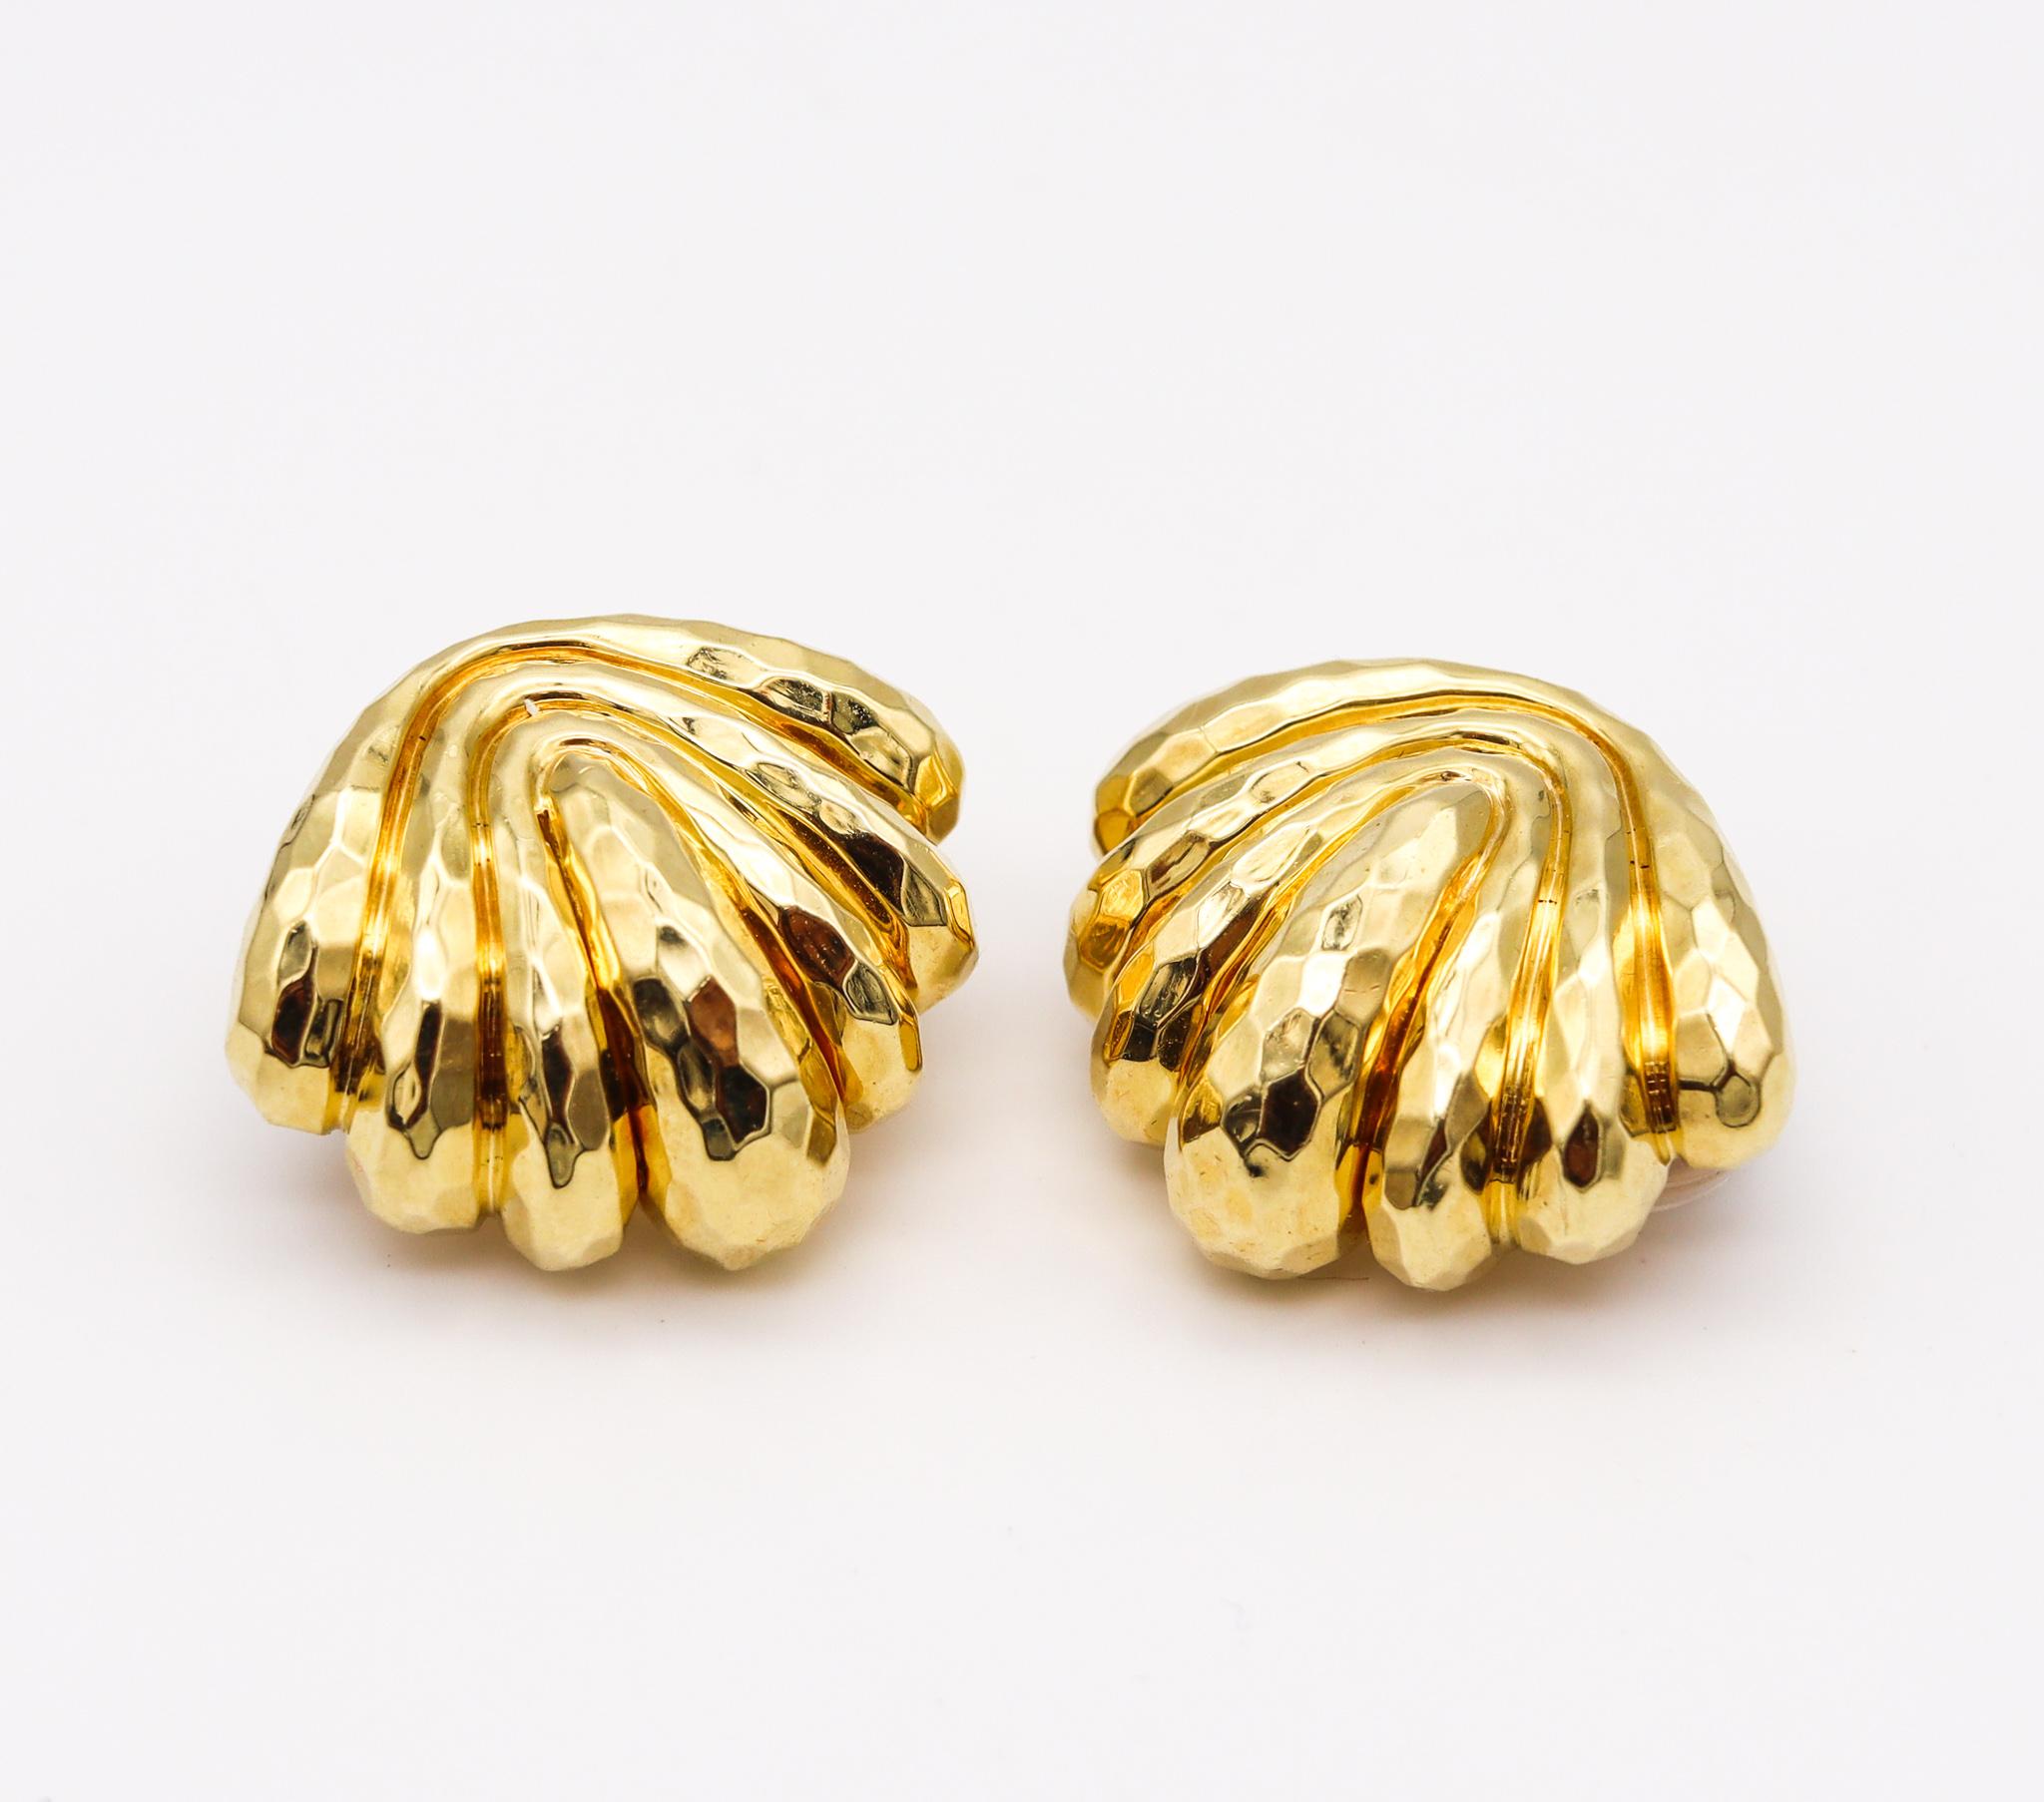 A pair of clips earrings designed by Henry Dunay.

Great hammered and Faceted ear-clips, created at the Henry Dunay atelier in New York city, back in the 1990's. They were carefully crafted in solid yellow gold of 18 karats with the surfaces